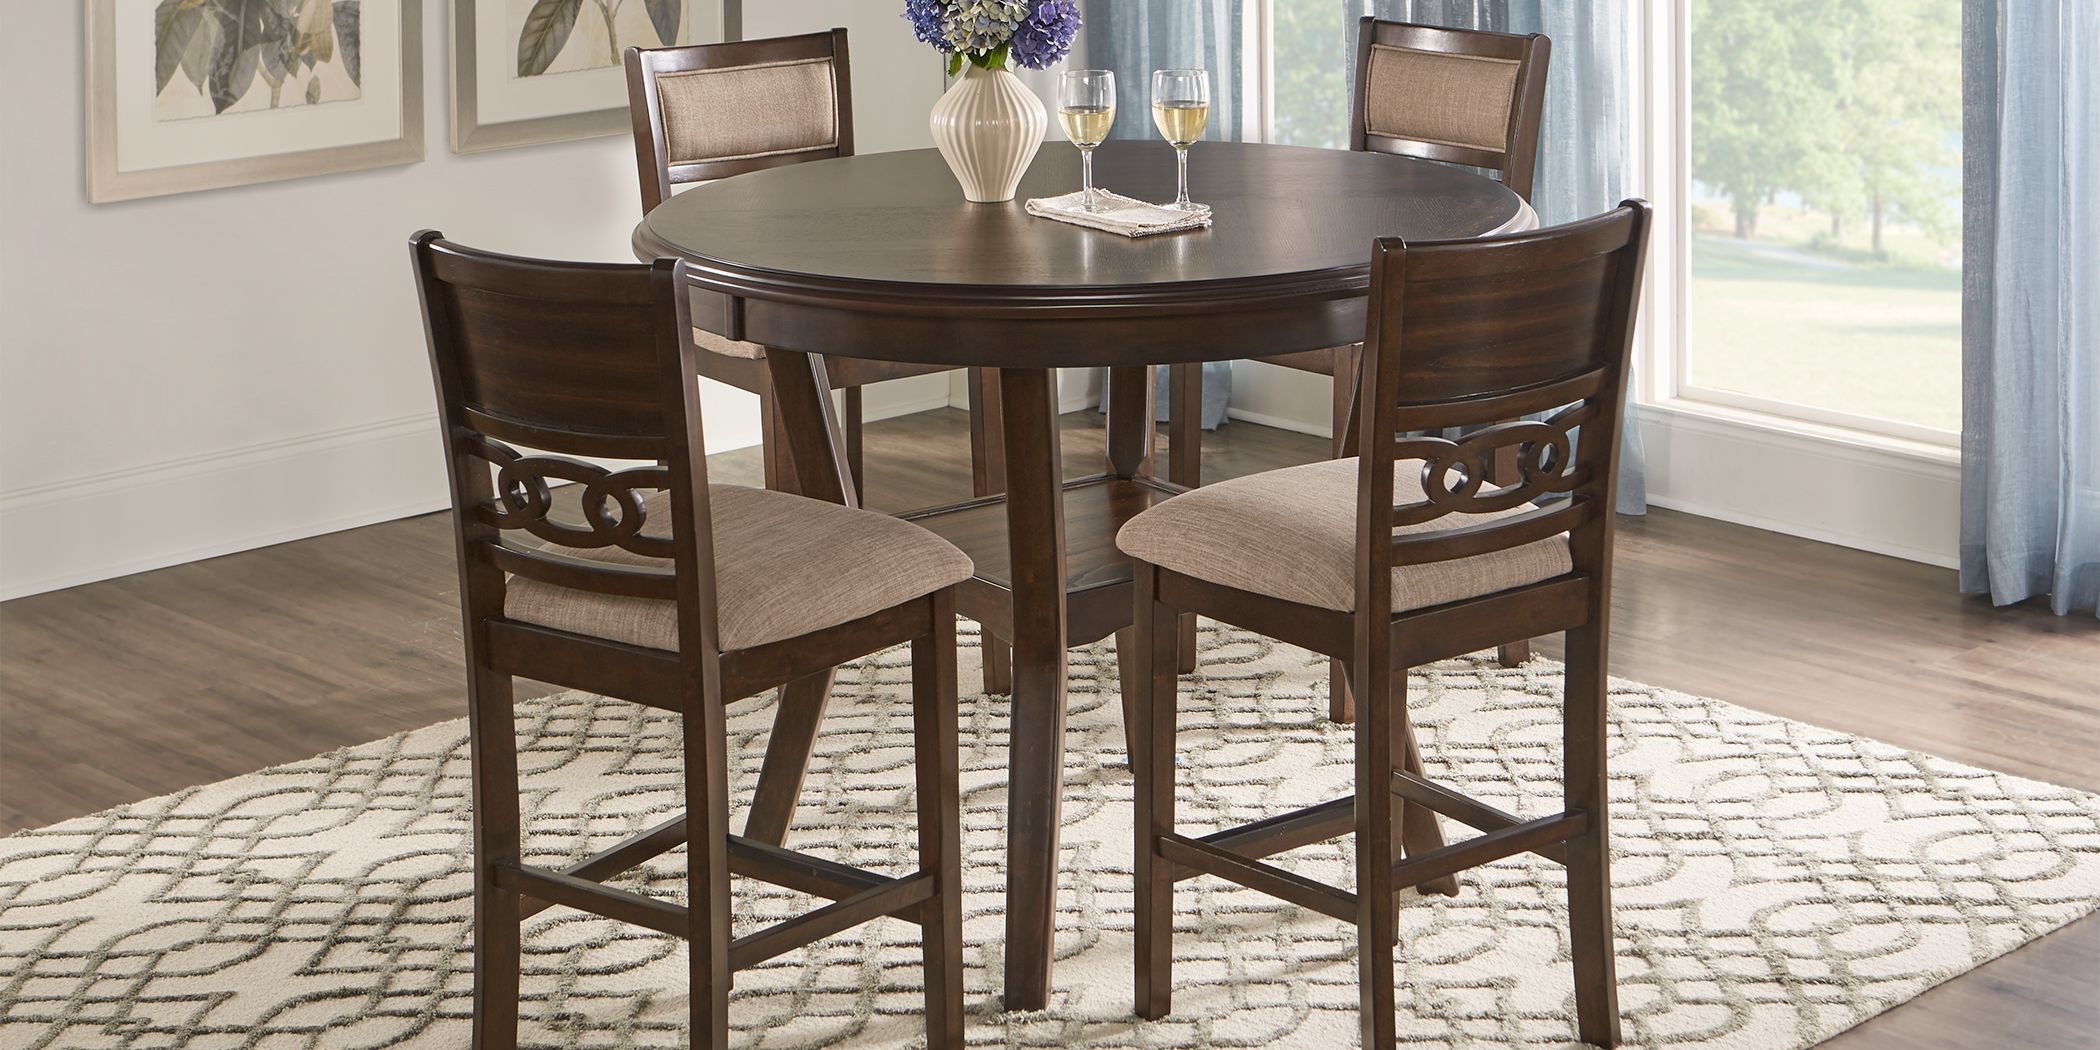 Rooms To Go Dining Room Furniture, Rooms To Go Furniture Dining Room Chairs